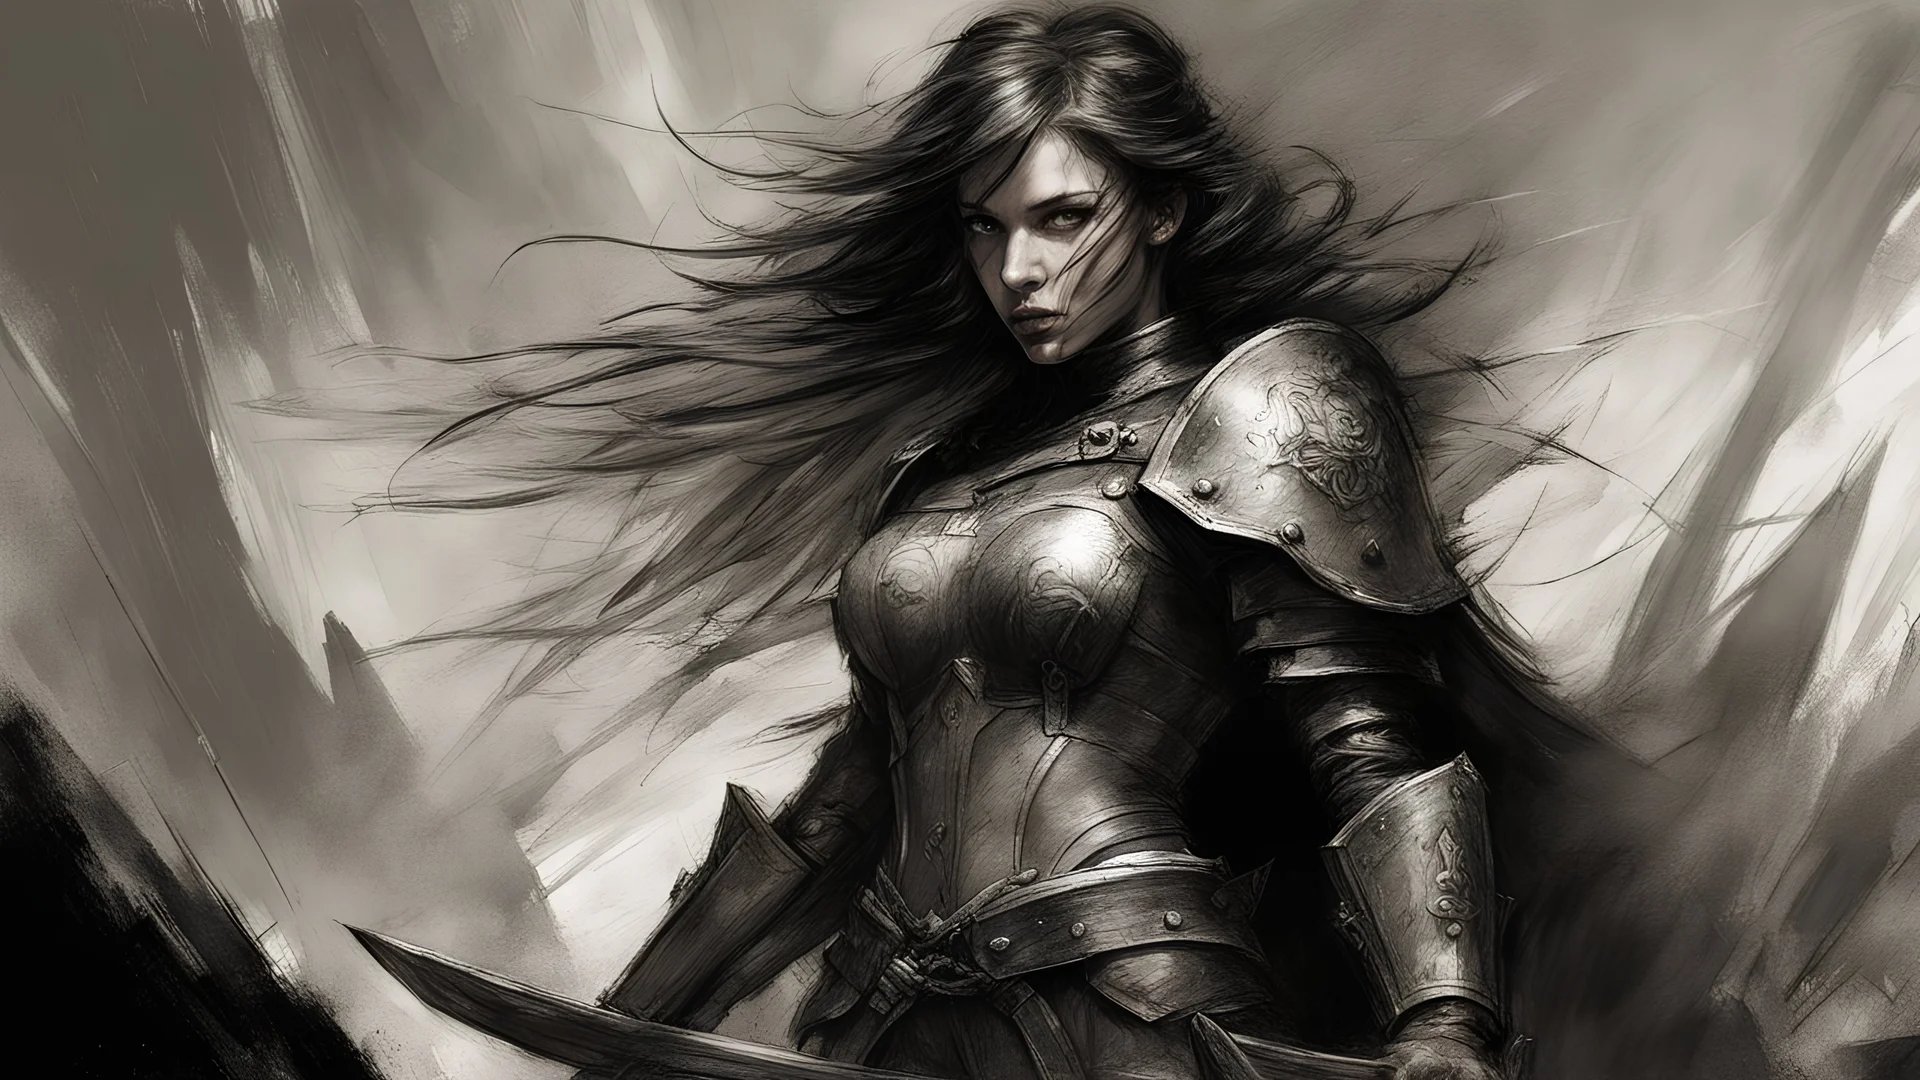 A stern girl warrior, Against the background of the great battle, horror and fear, black pencil, oil, Raymond Swanland